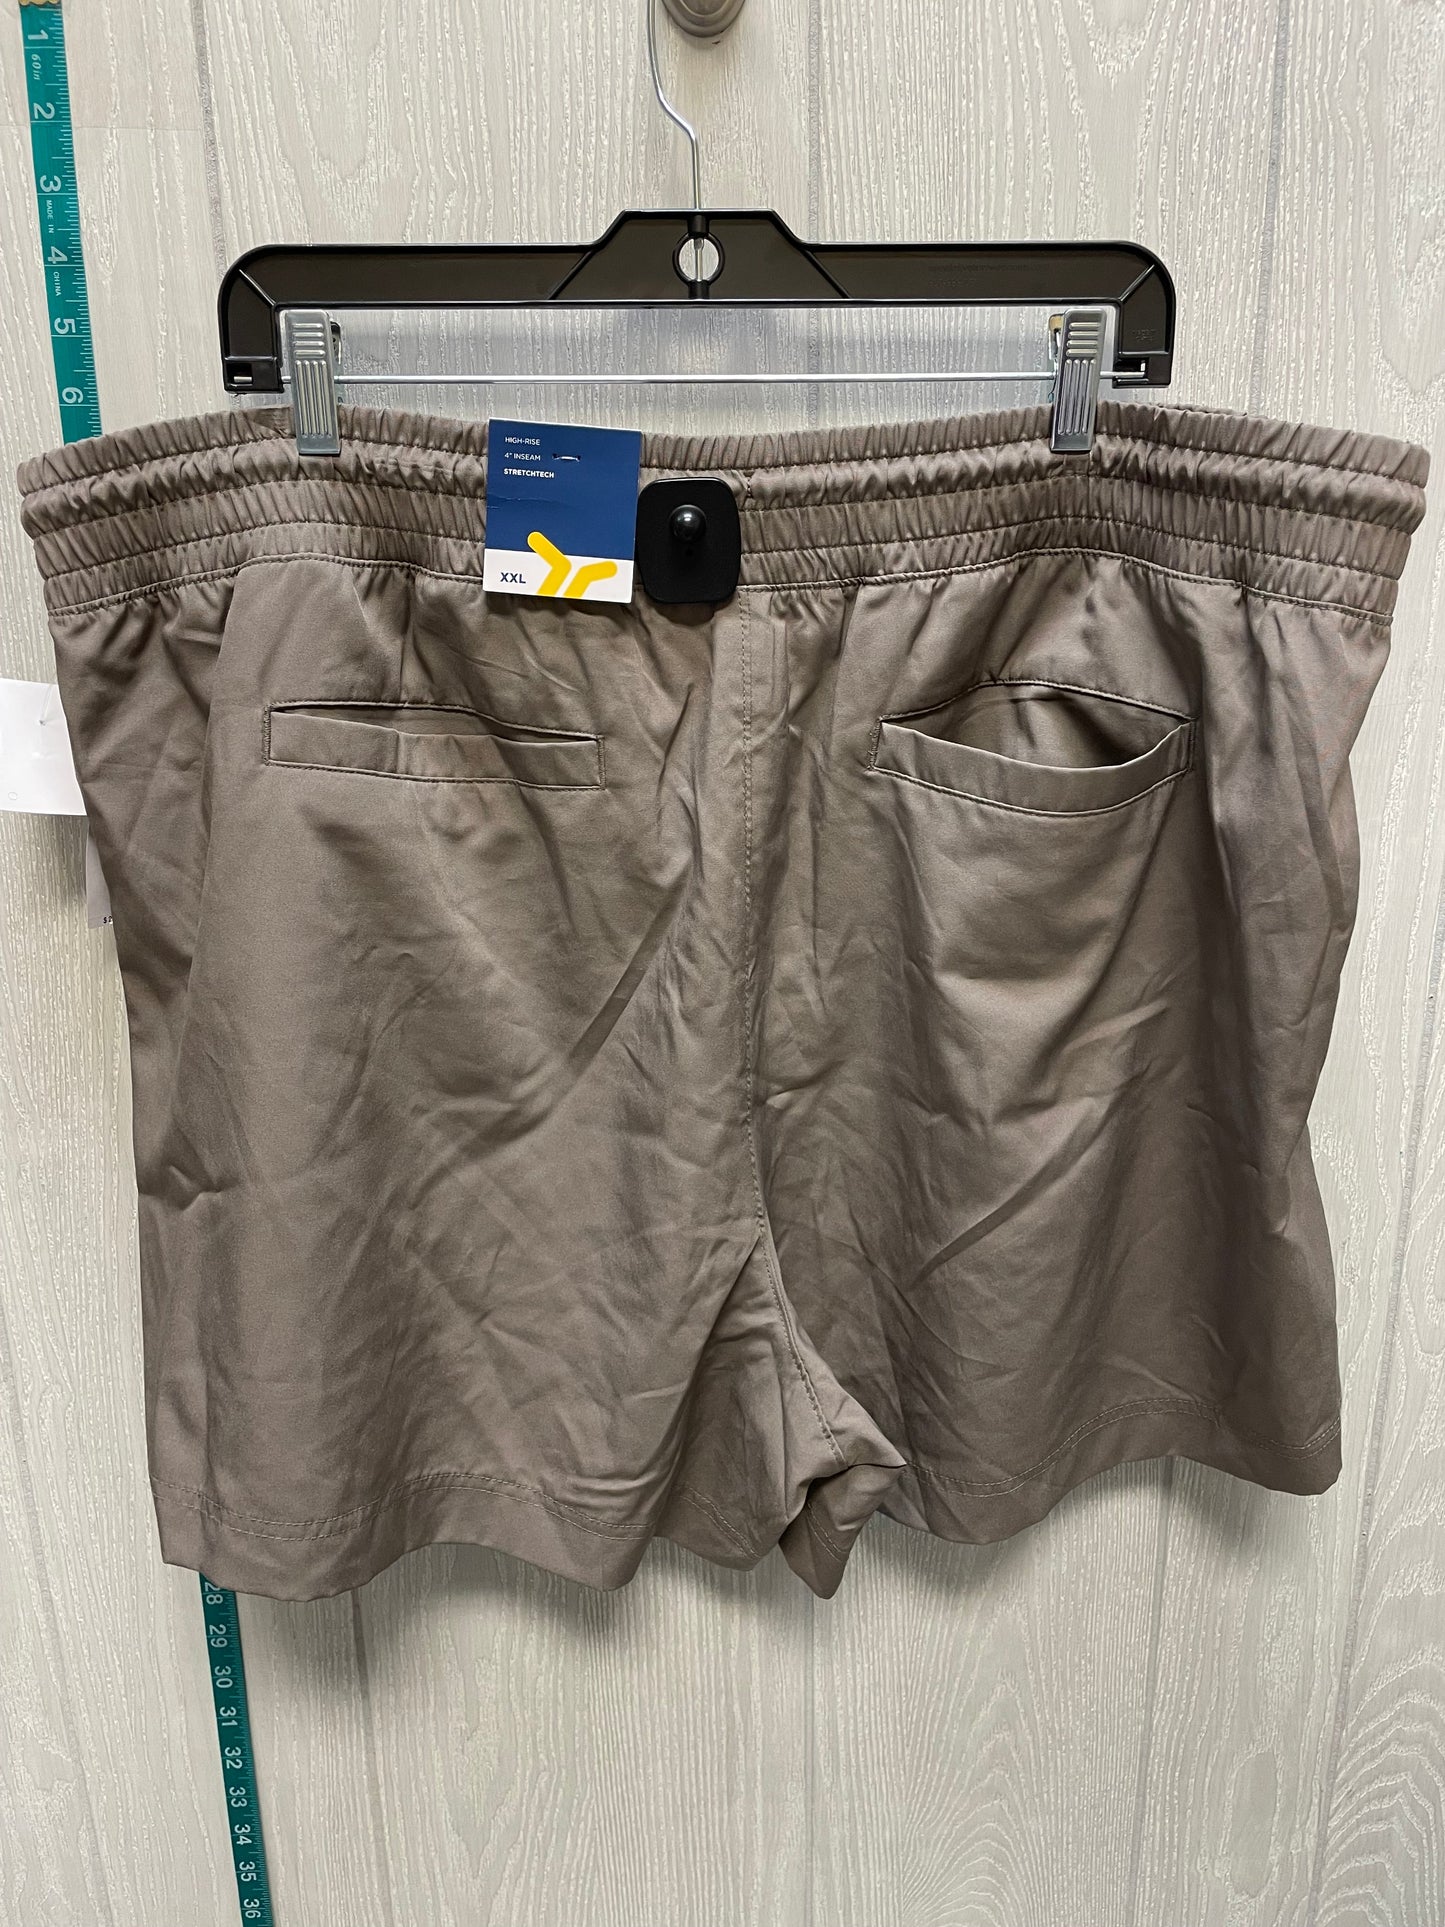 Green Shorts Old Navy, Size 20